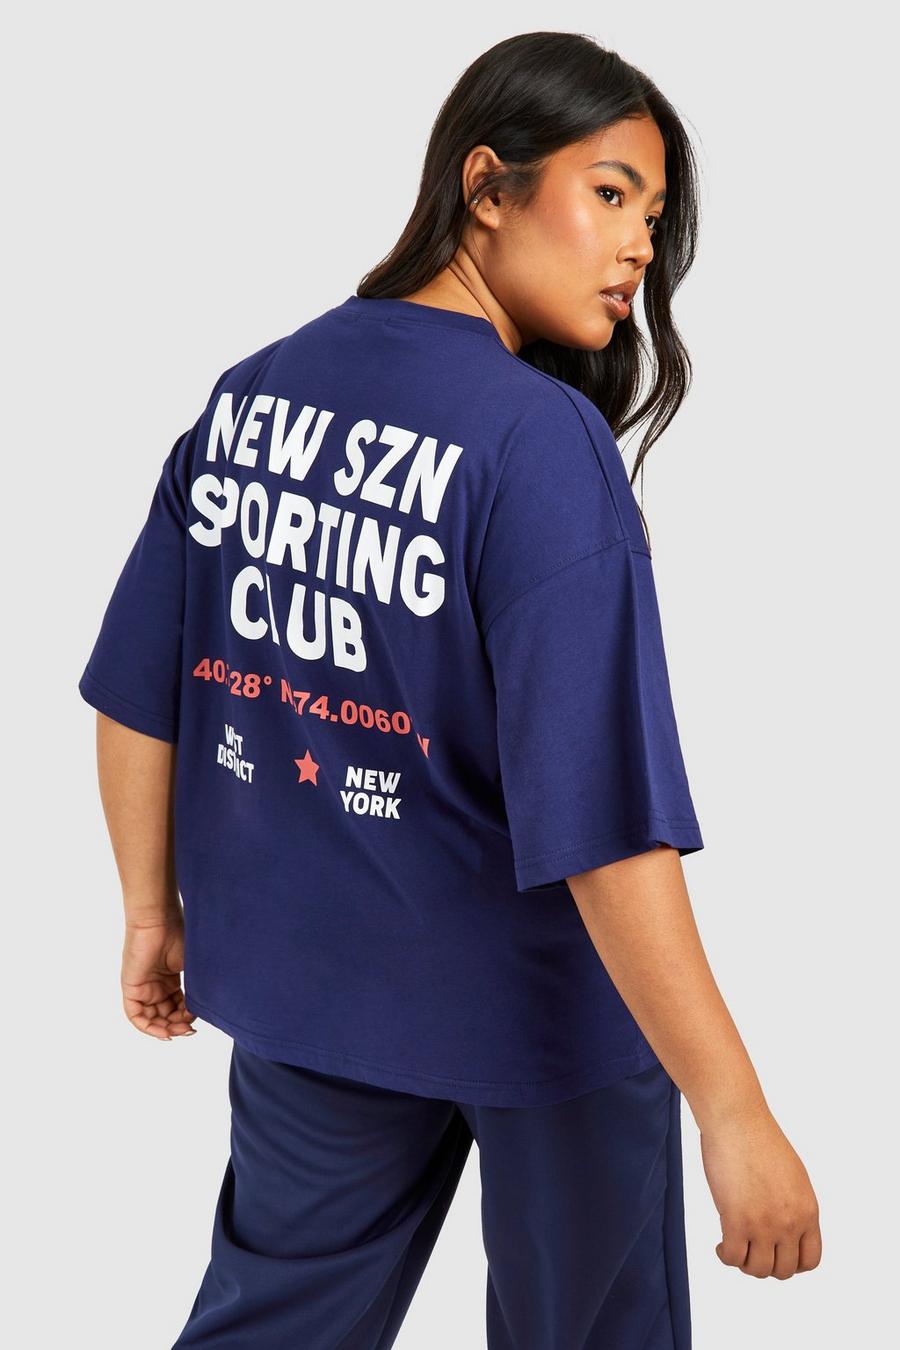 T-shirt Plus Size oversize New Szn Sports Club, Navy image number 1